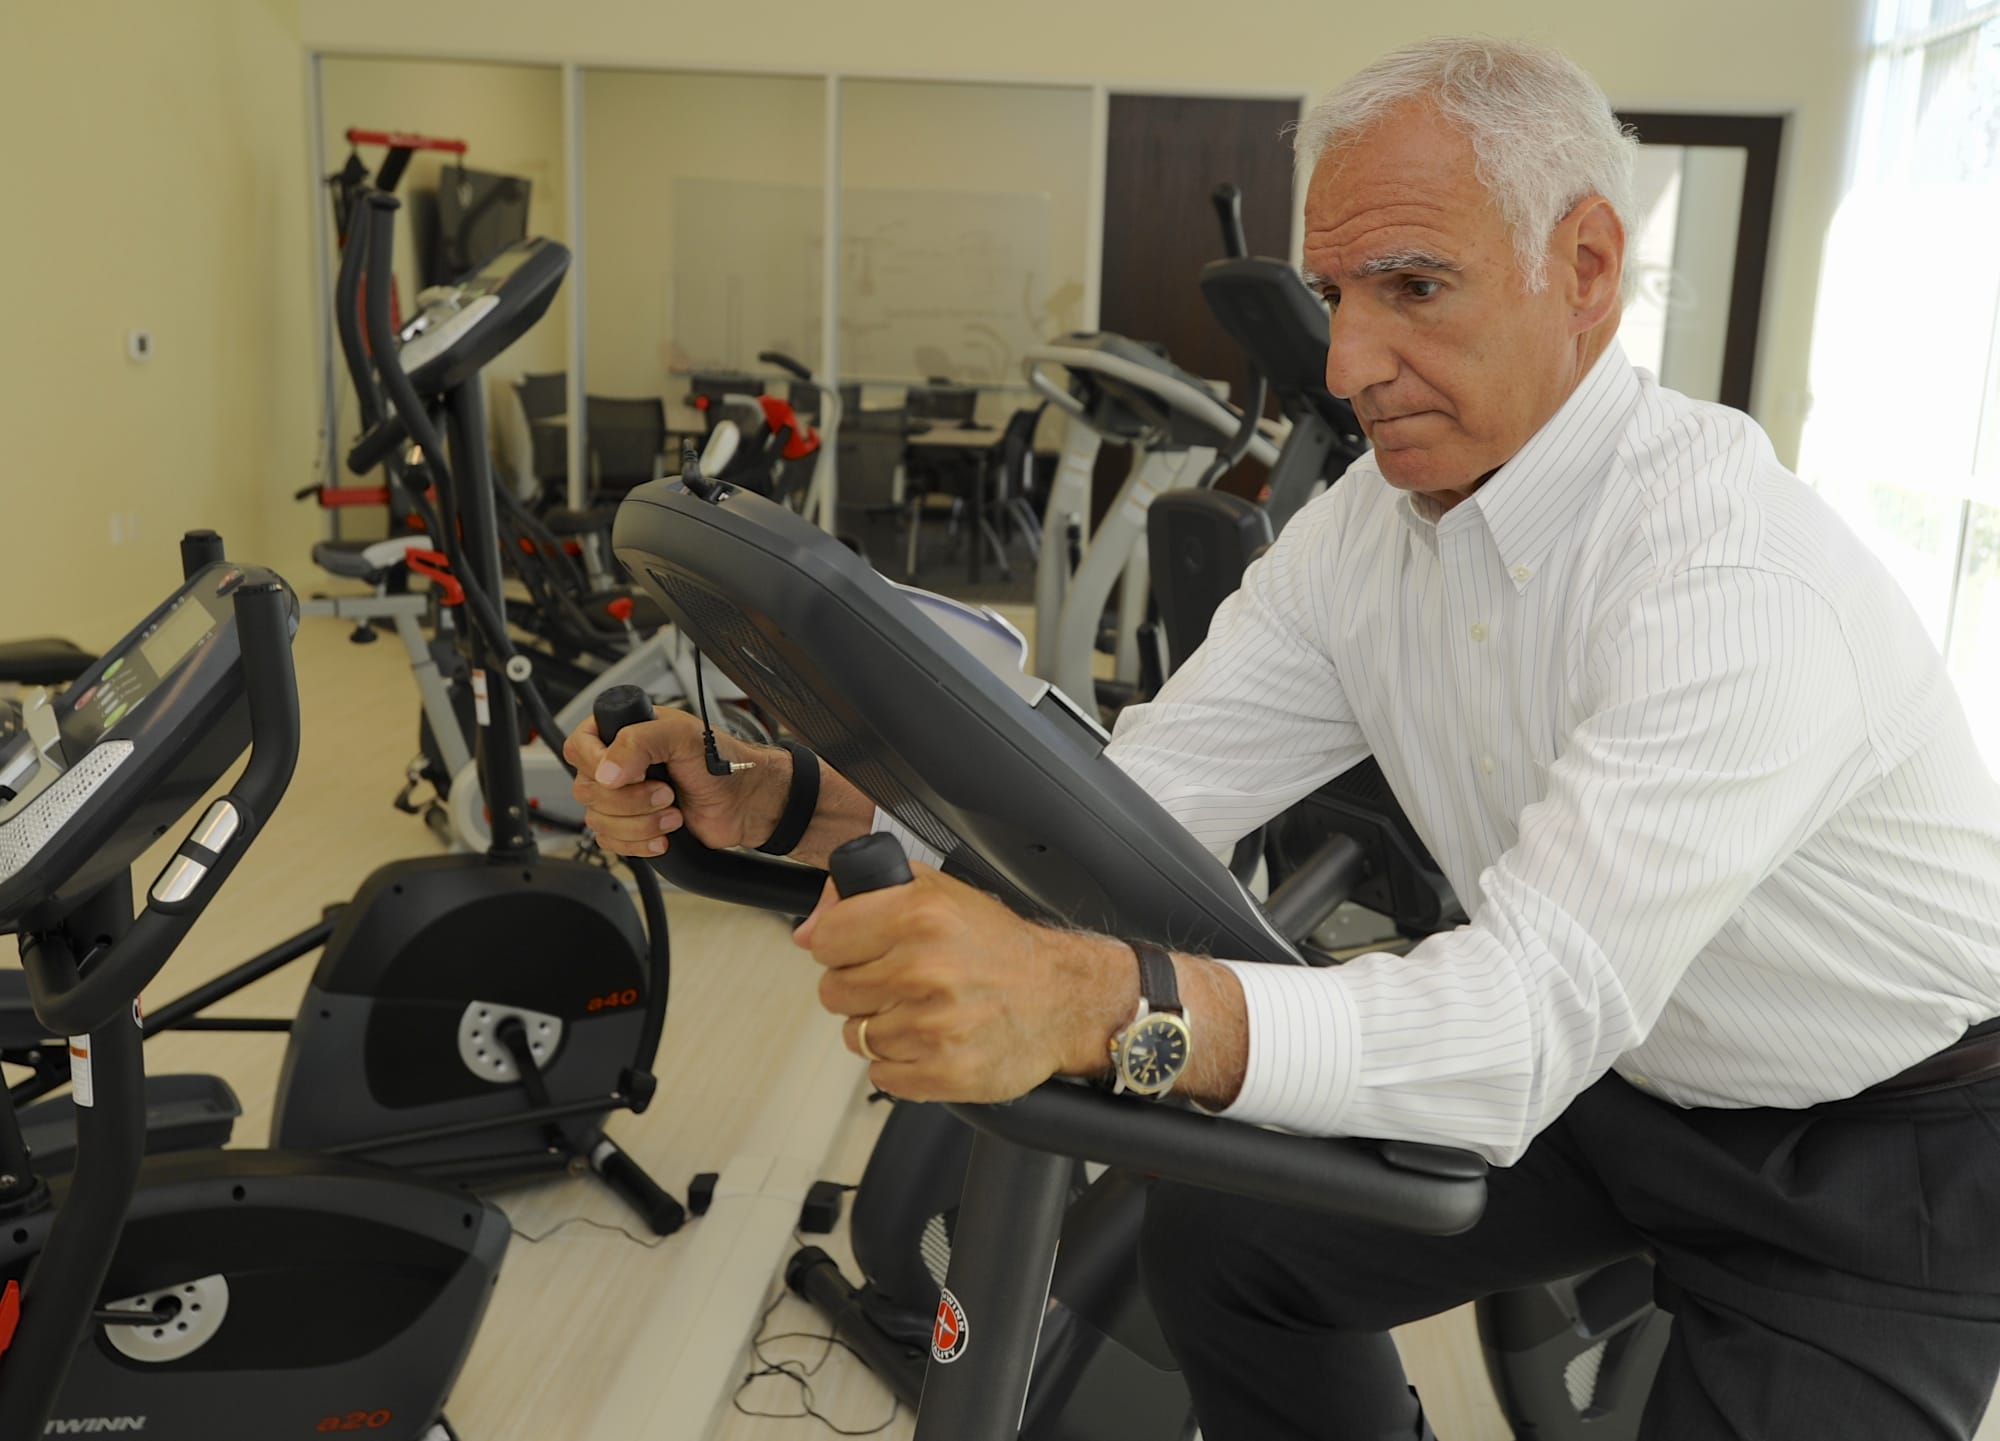 Nautilus CEO Bruce Cazenave demonstrates the features of the new Schwinn upright bike in the showroom at the new headquarters of Nautilus in Vancouver.